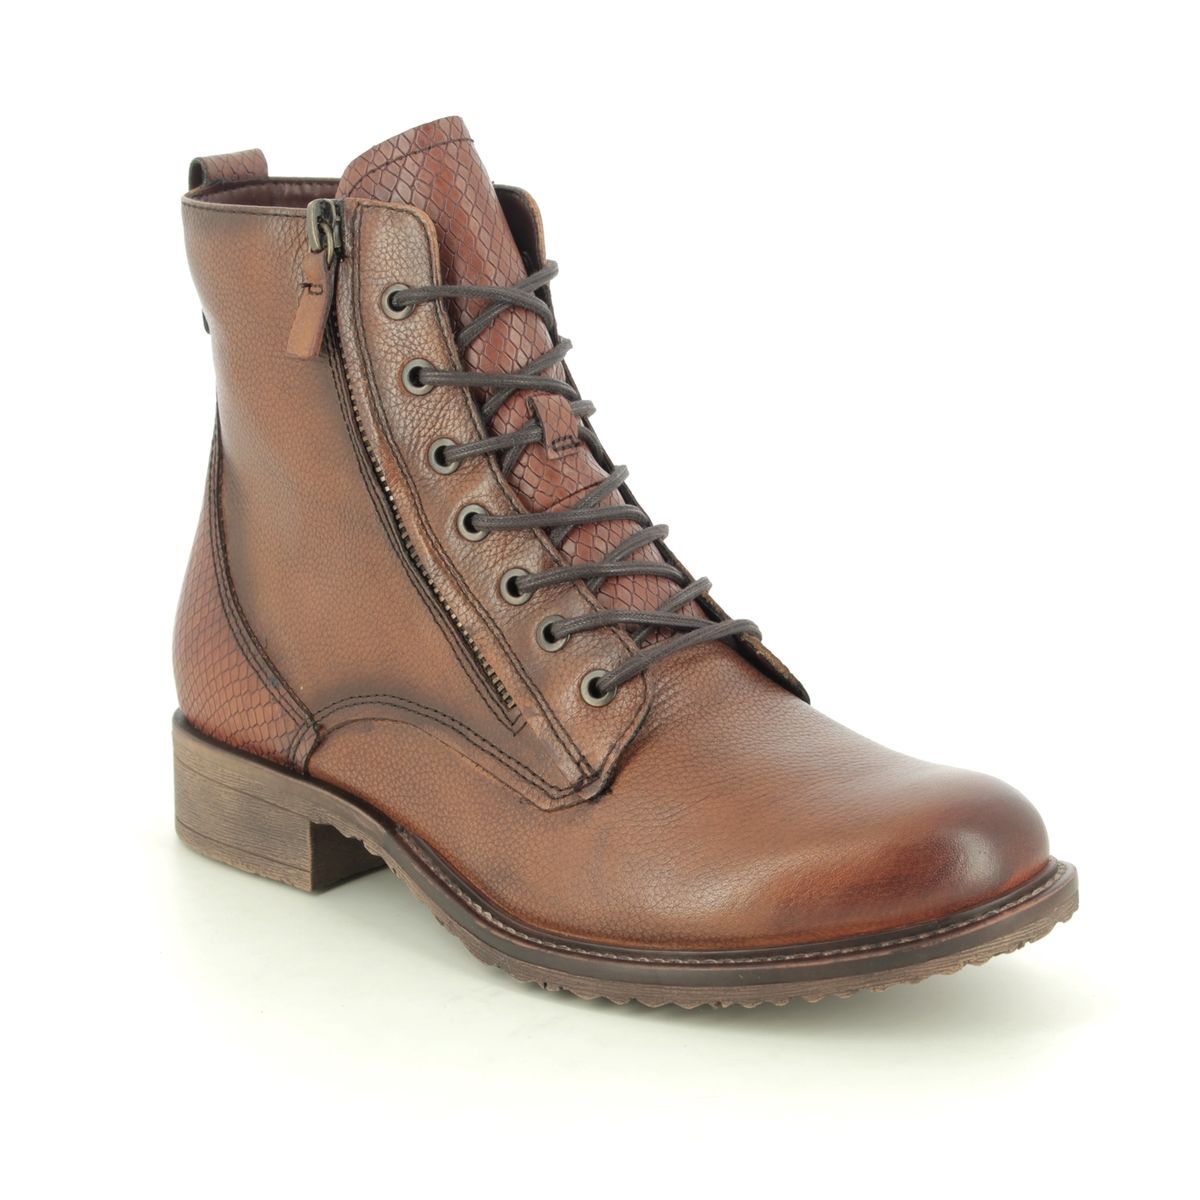 Tamaris Anouk Tan Leather  Womens Lace Up Boots 25211-25-378 In Size 39 In Plain Tan Leather